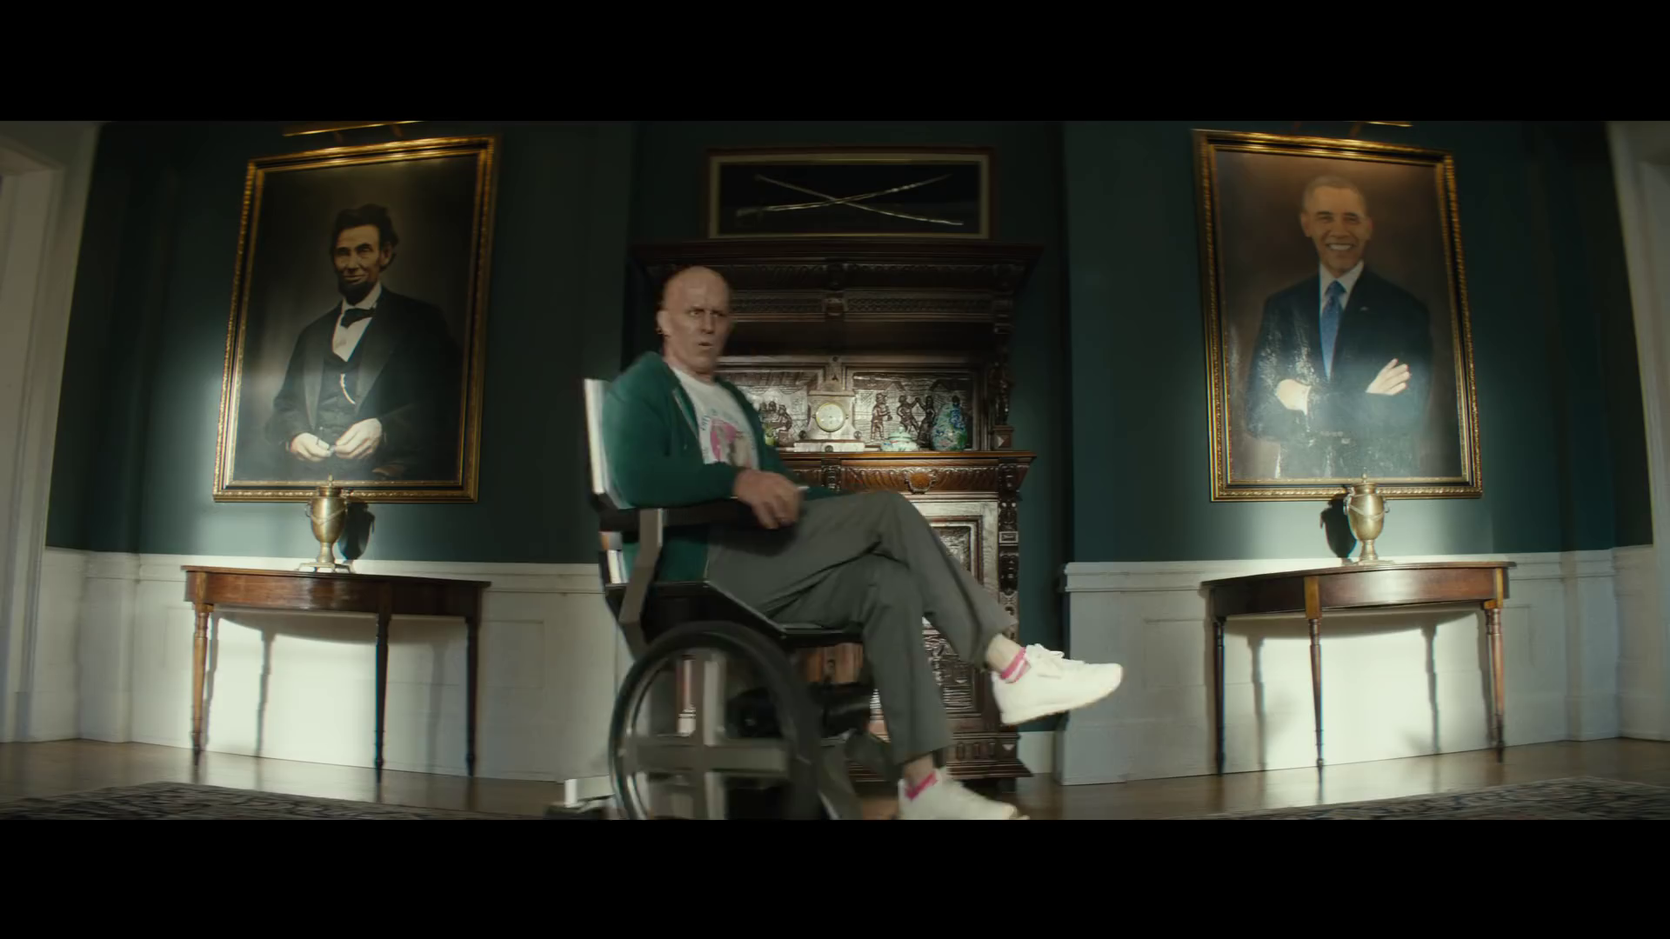 But it looks as though the X-Mansion will remain mysteriously empty. How else is Deadpool getting to mess about with Charles Xavier’s chair? Incidentally, Professor X is an Obama fan...